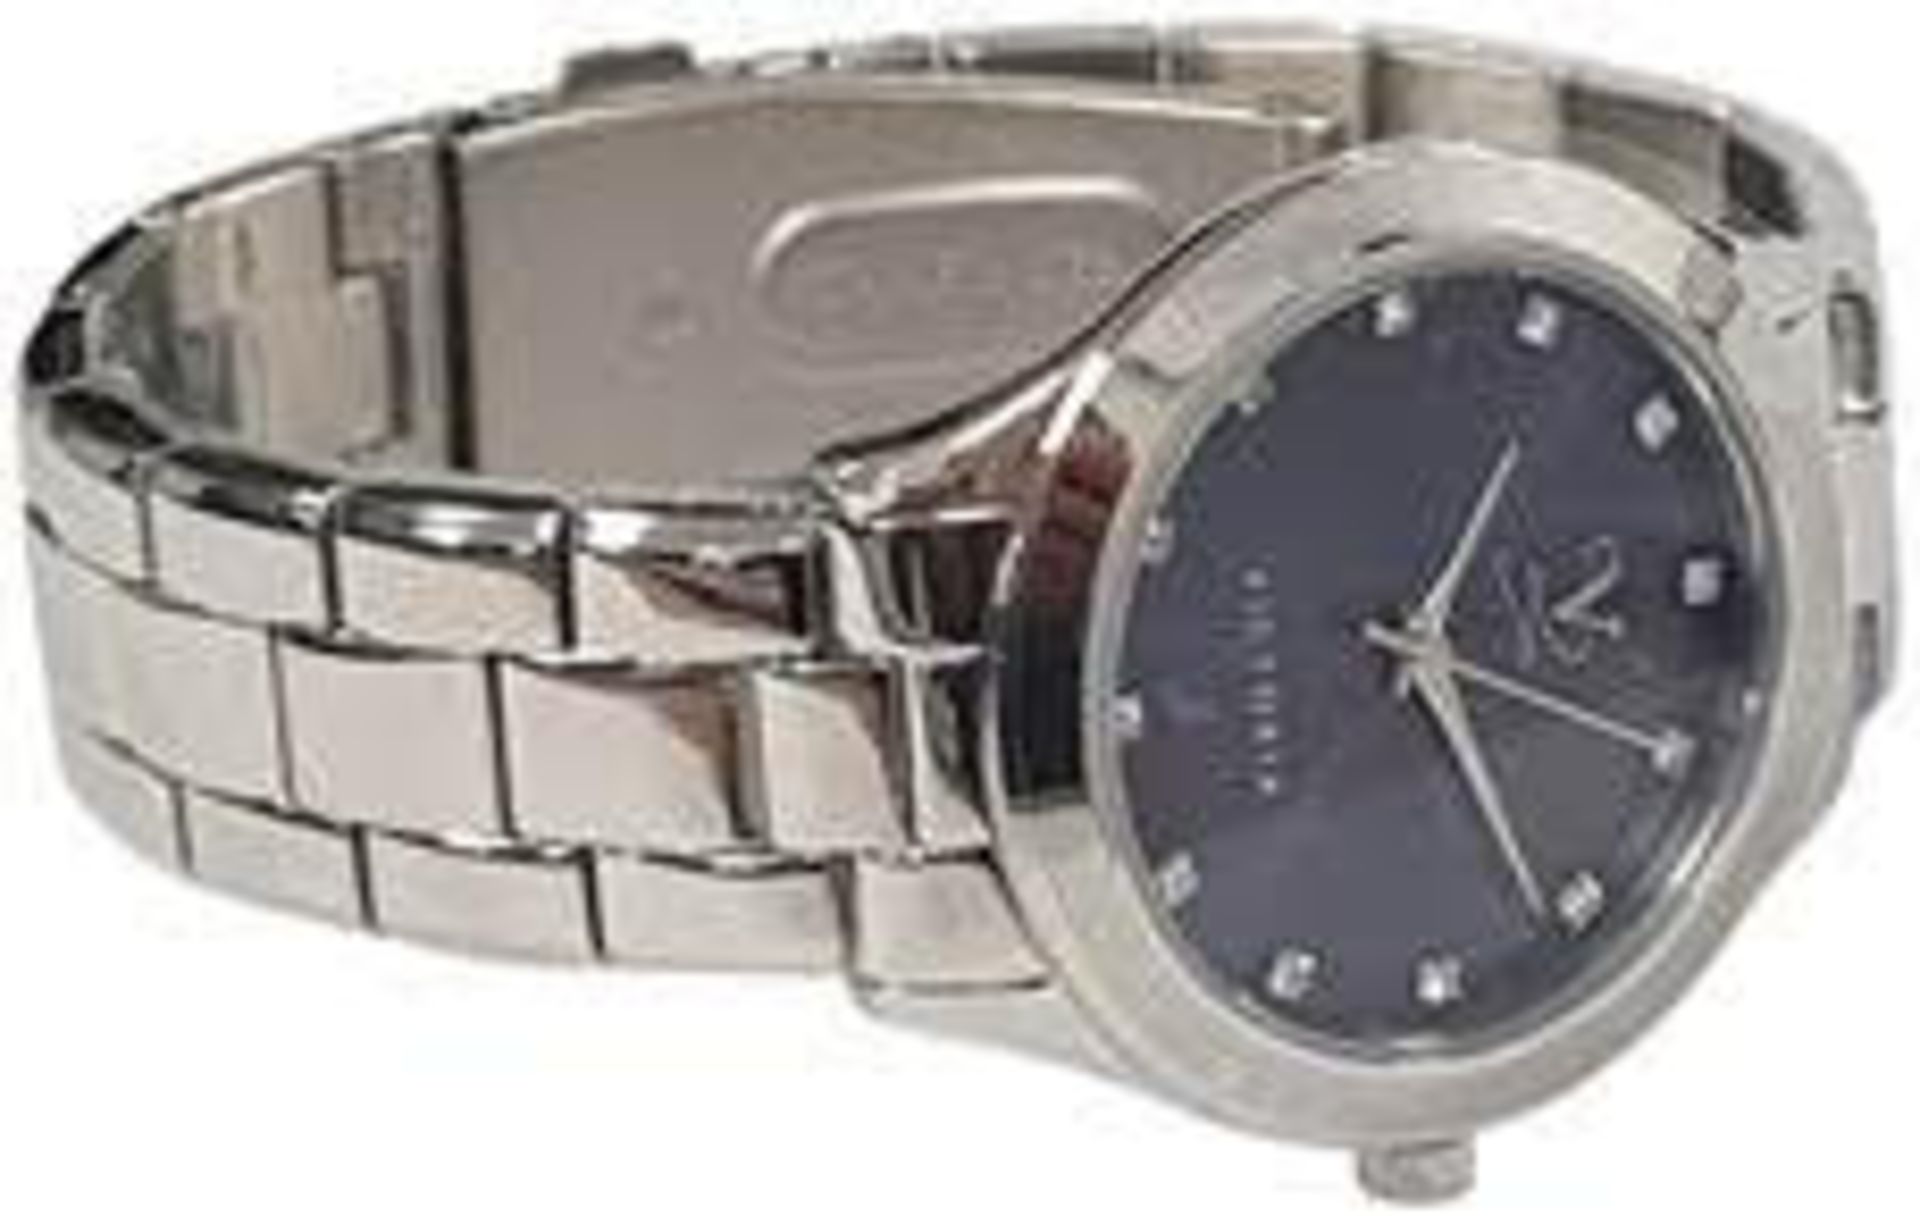 V *TRADE QTY* Brand New Ladies Victoria Stainless Steel Watch With Bracelet Strap - Navy Face - - Image 3 of 3